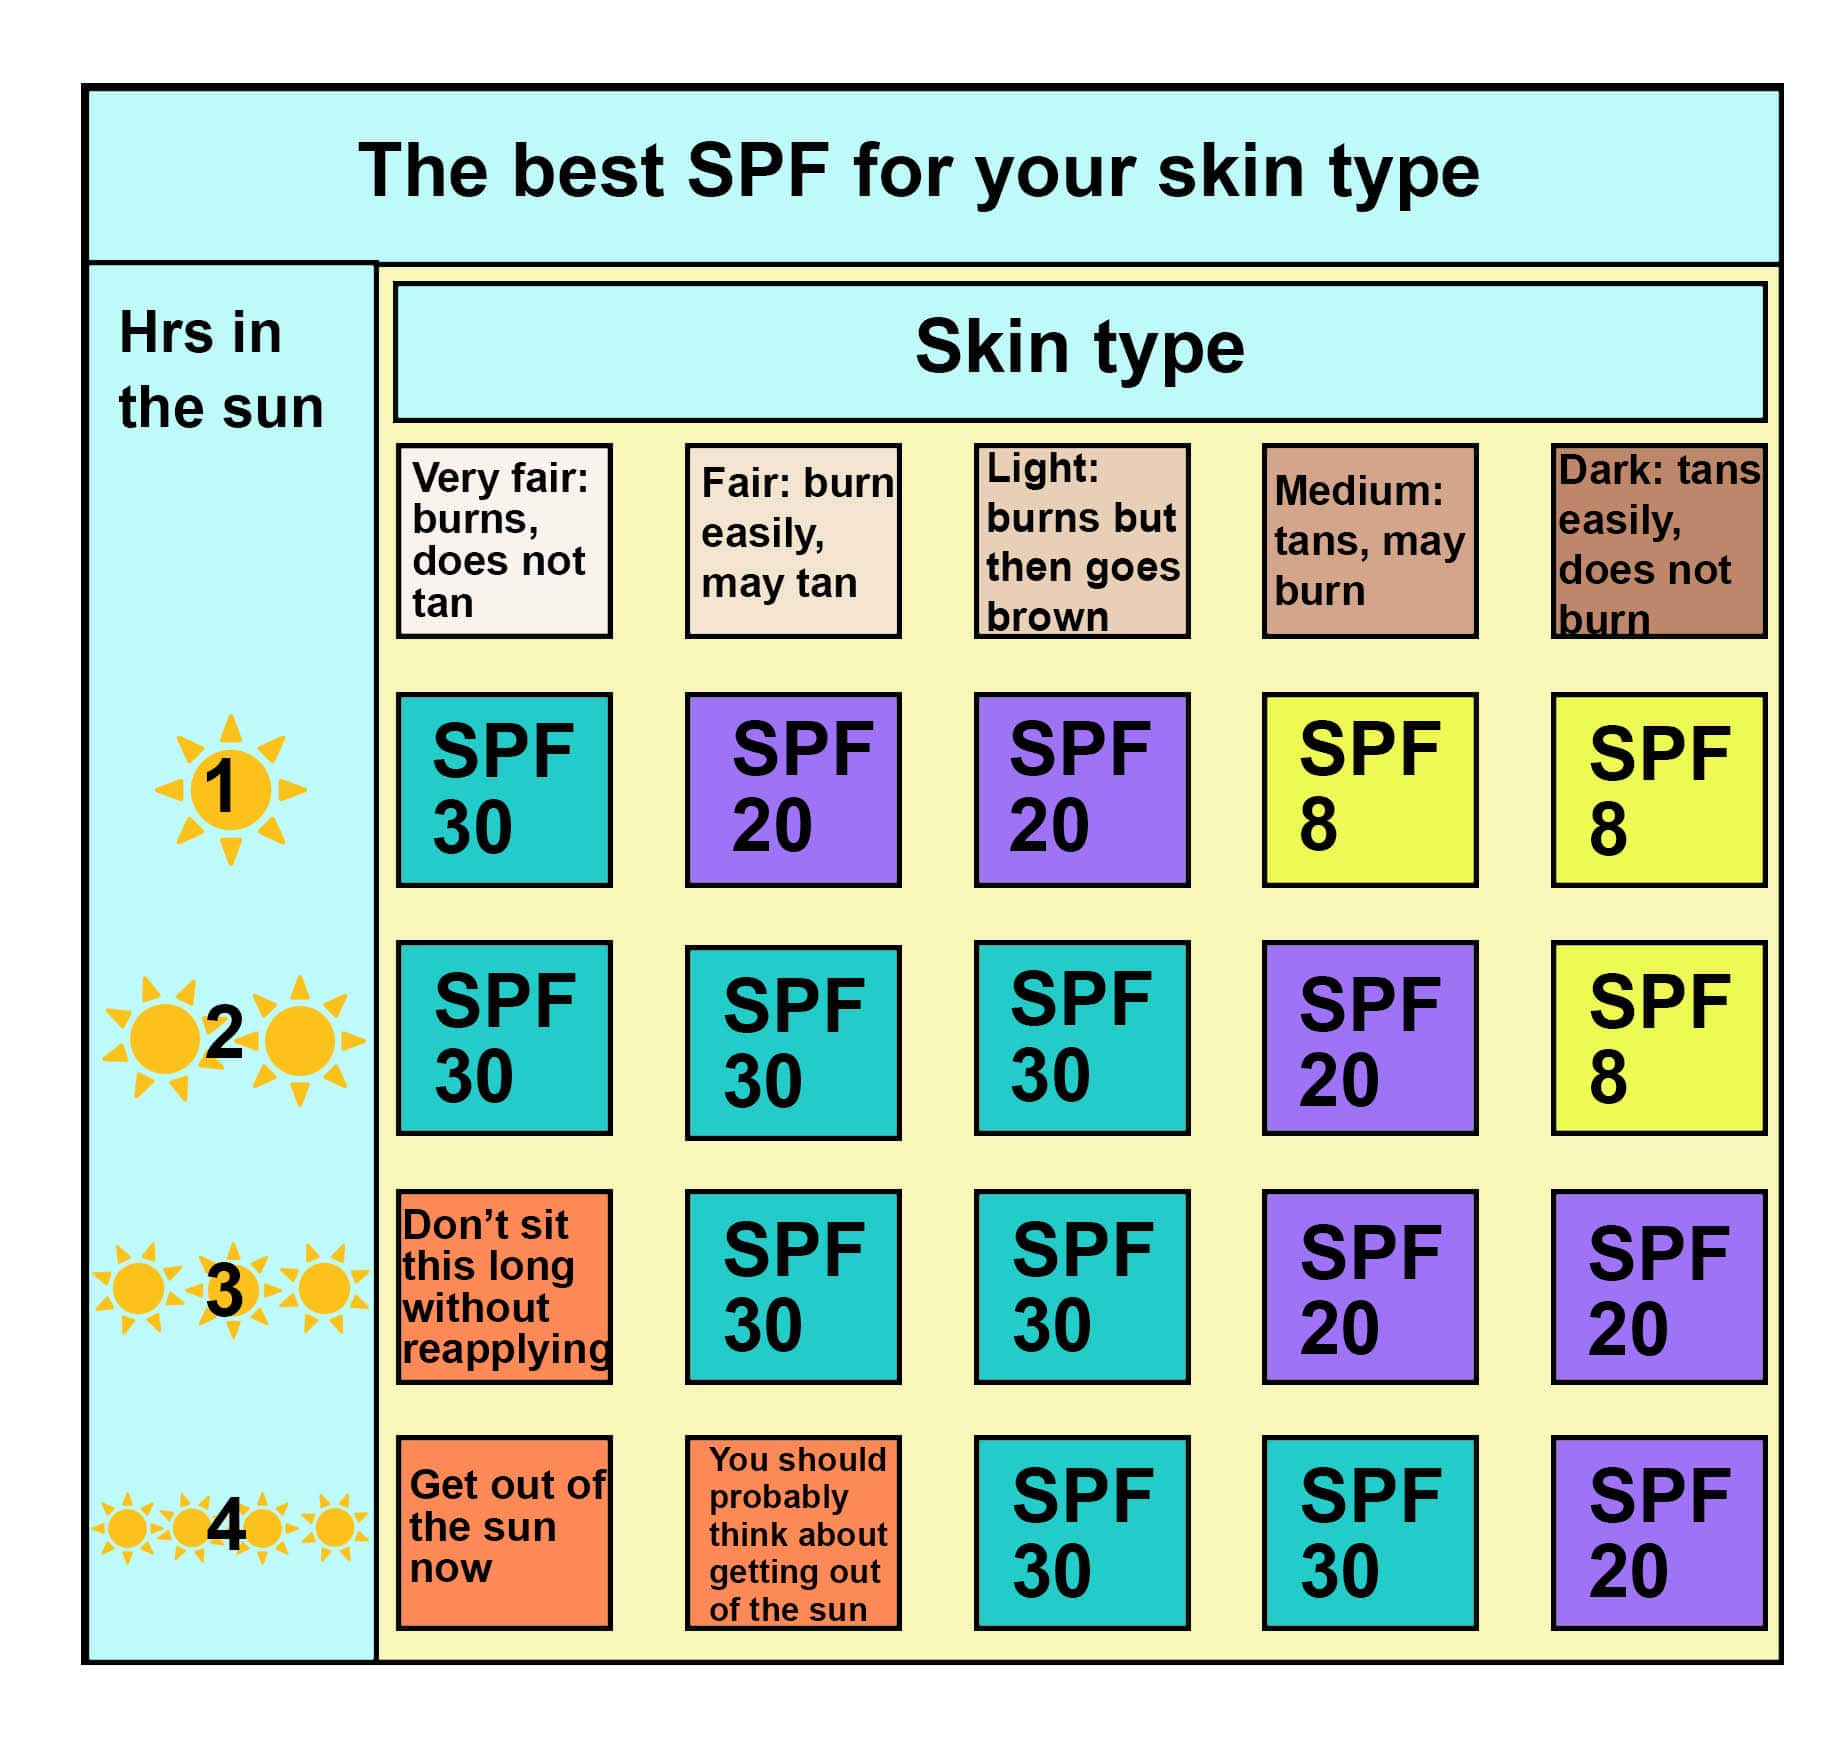 We've All Heard of SPF, but What About UPF? - Fishers Finery